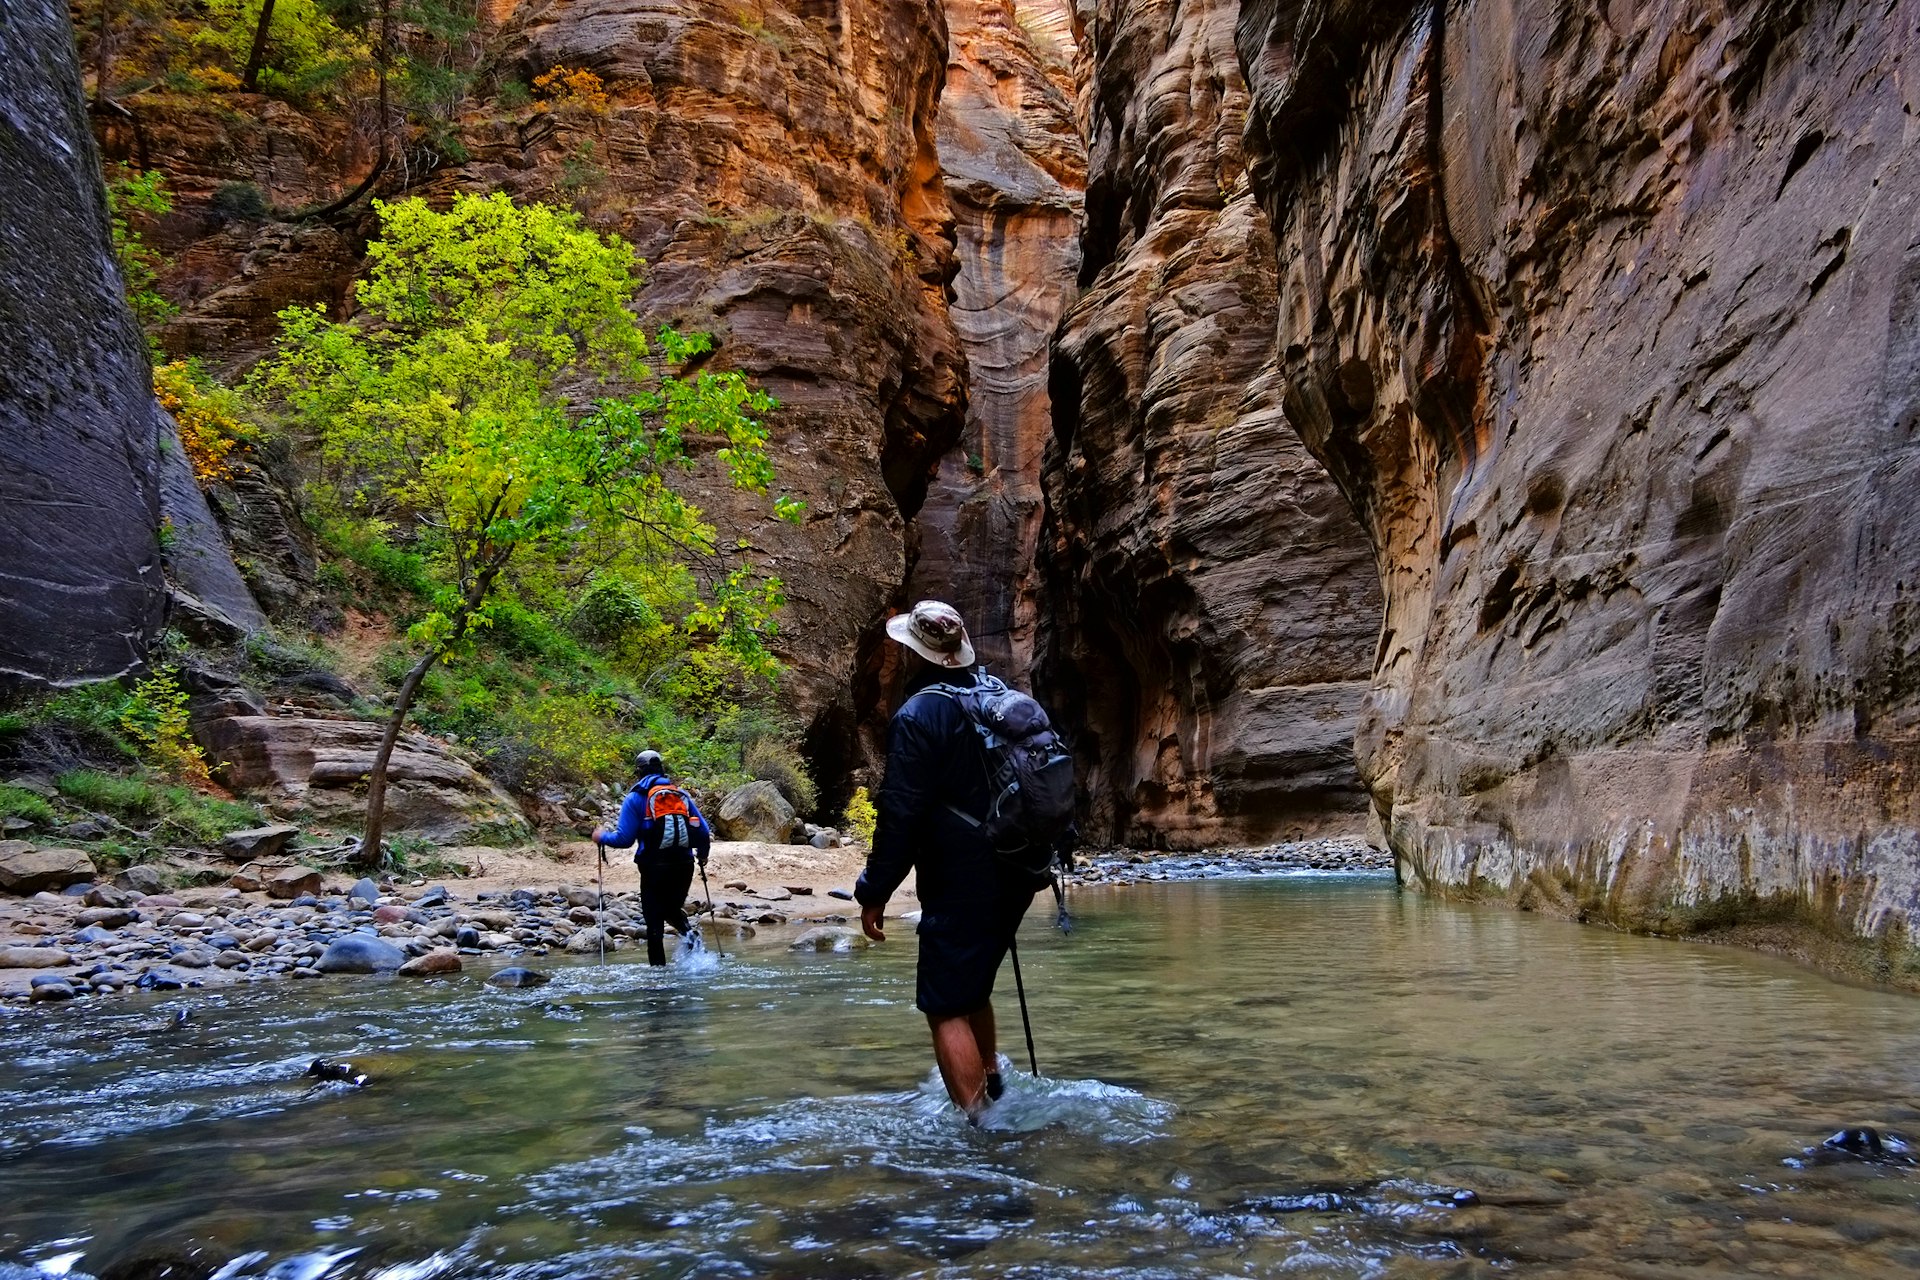 Several hikers walk through The Narrows, formed by the Virgin River flowing through the red rock canyon in New Gorge National Park and Preserve